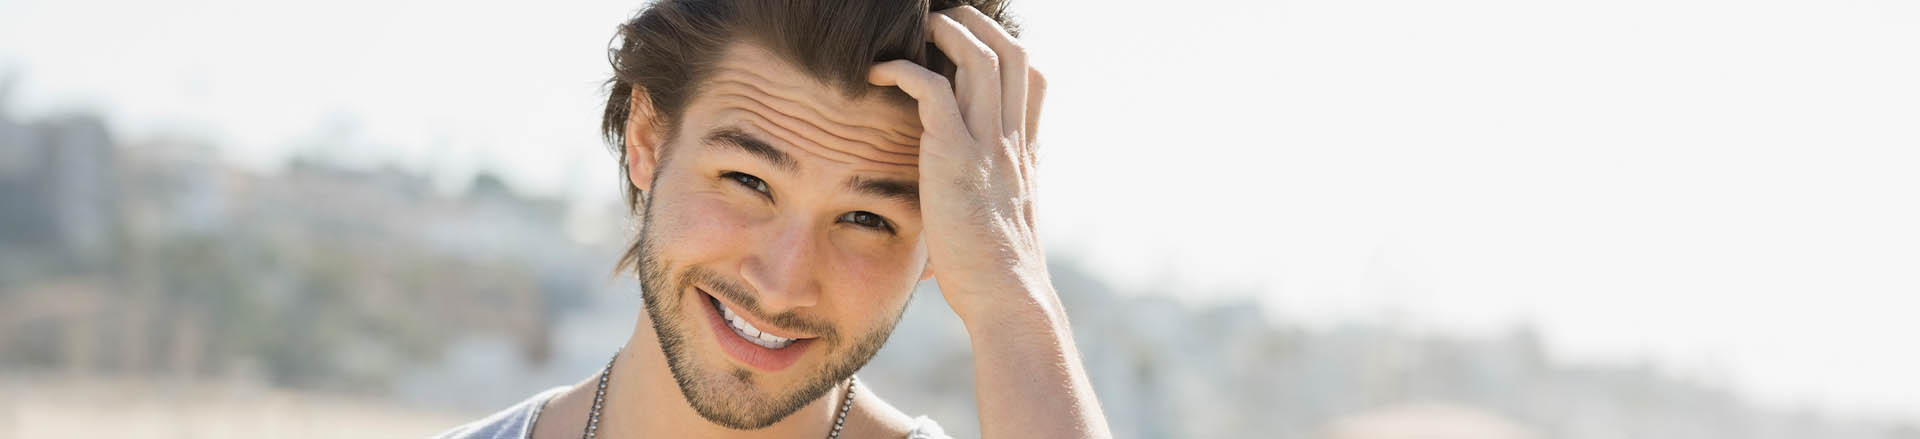 Reasonable expectations from a hair transplant